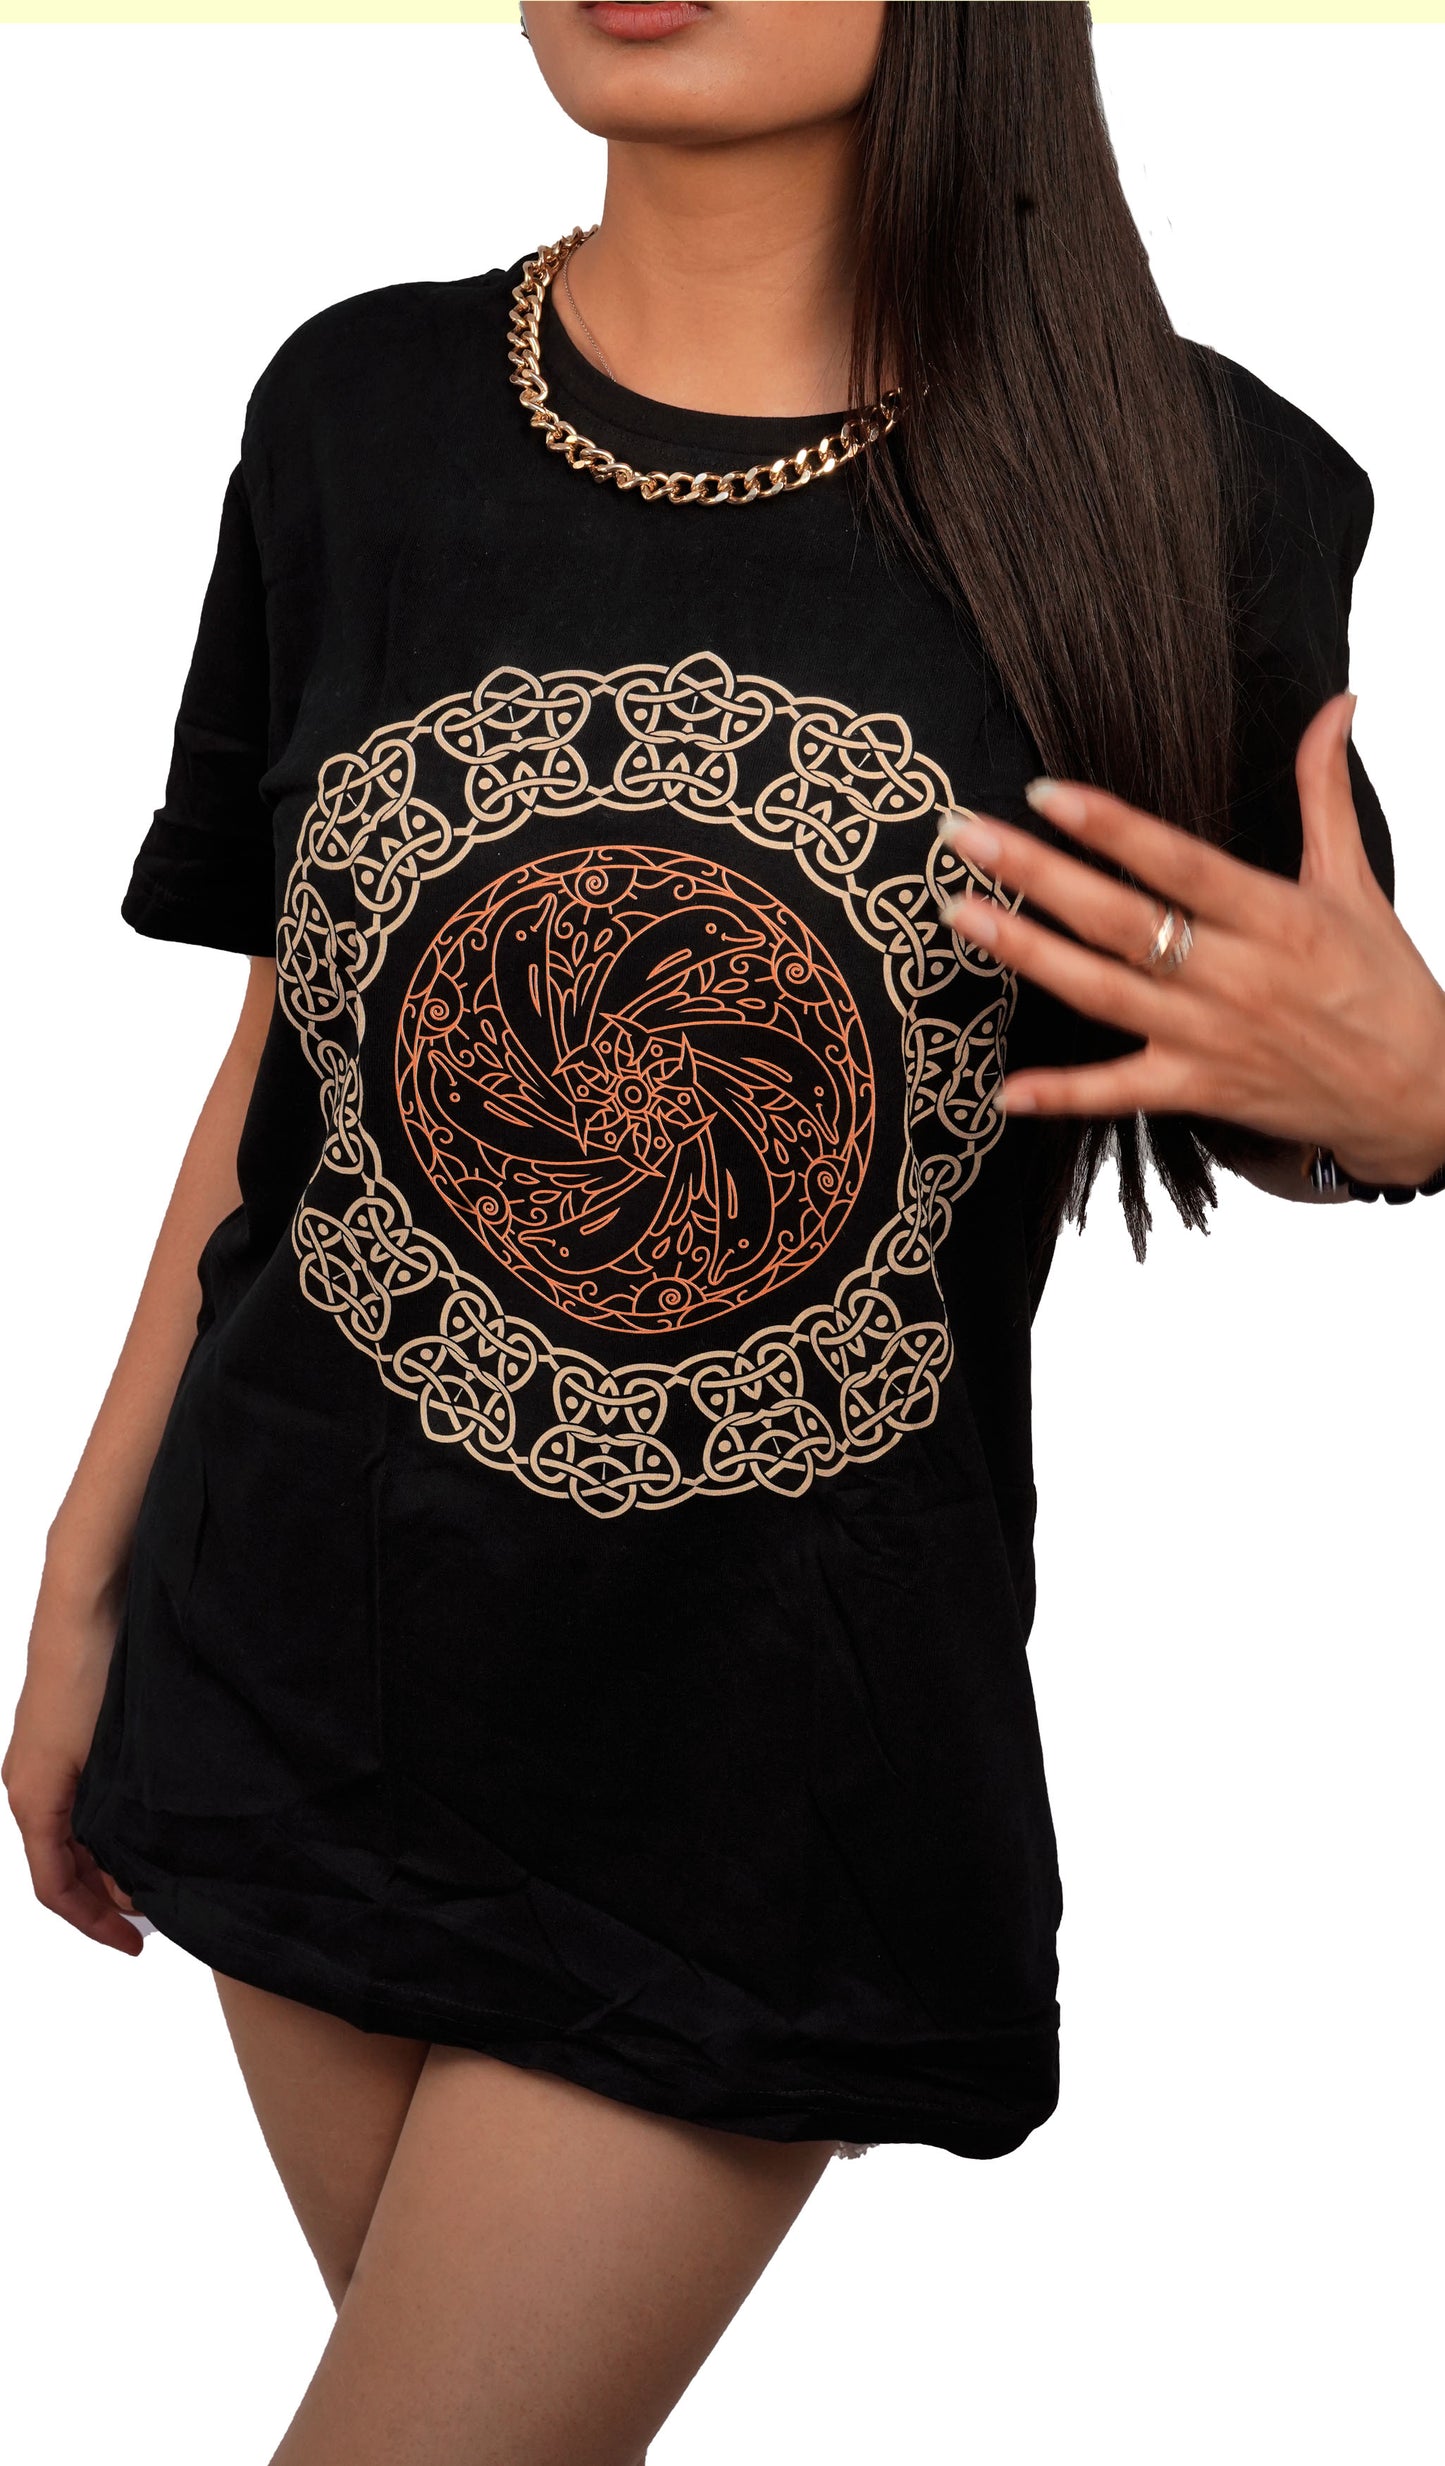 Nirvana Dolphin Printed T-shirt In Black Color For Women